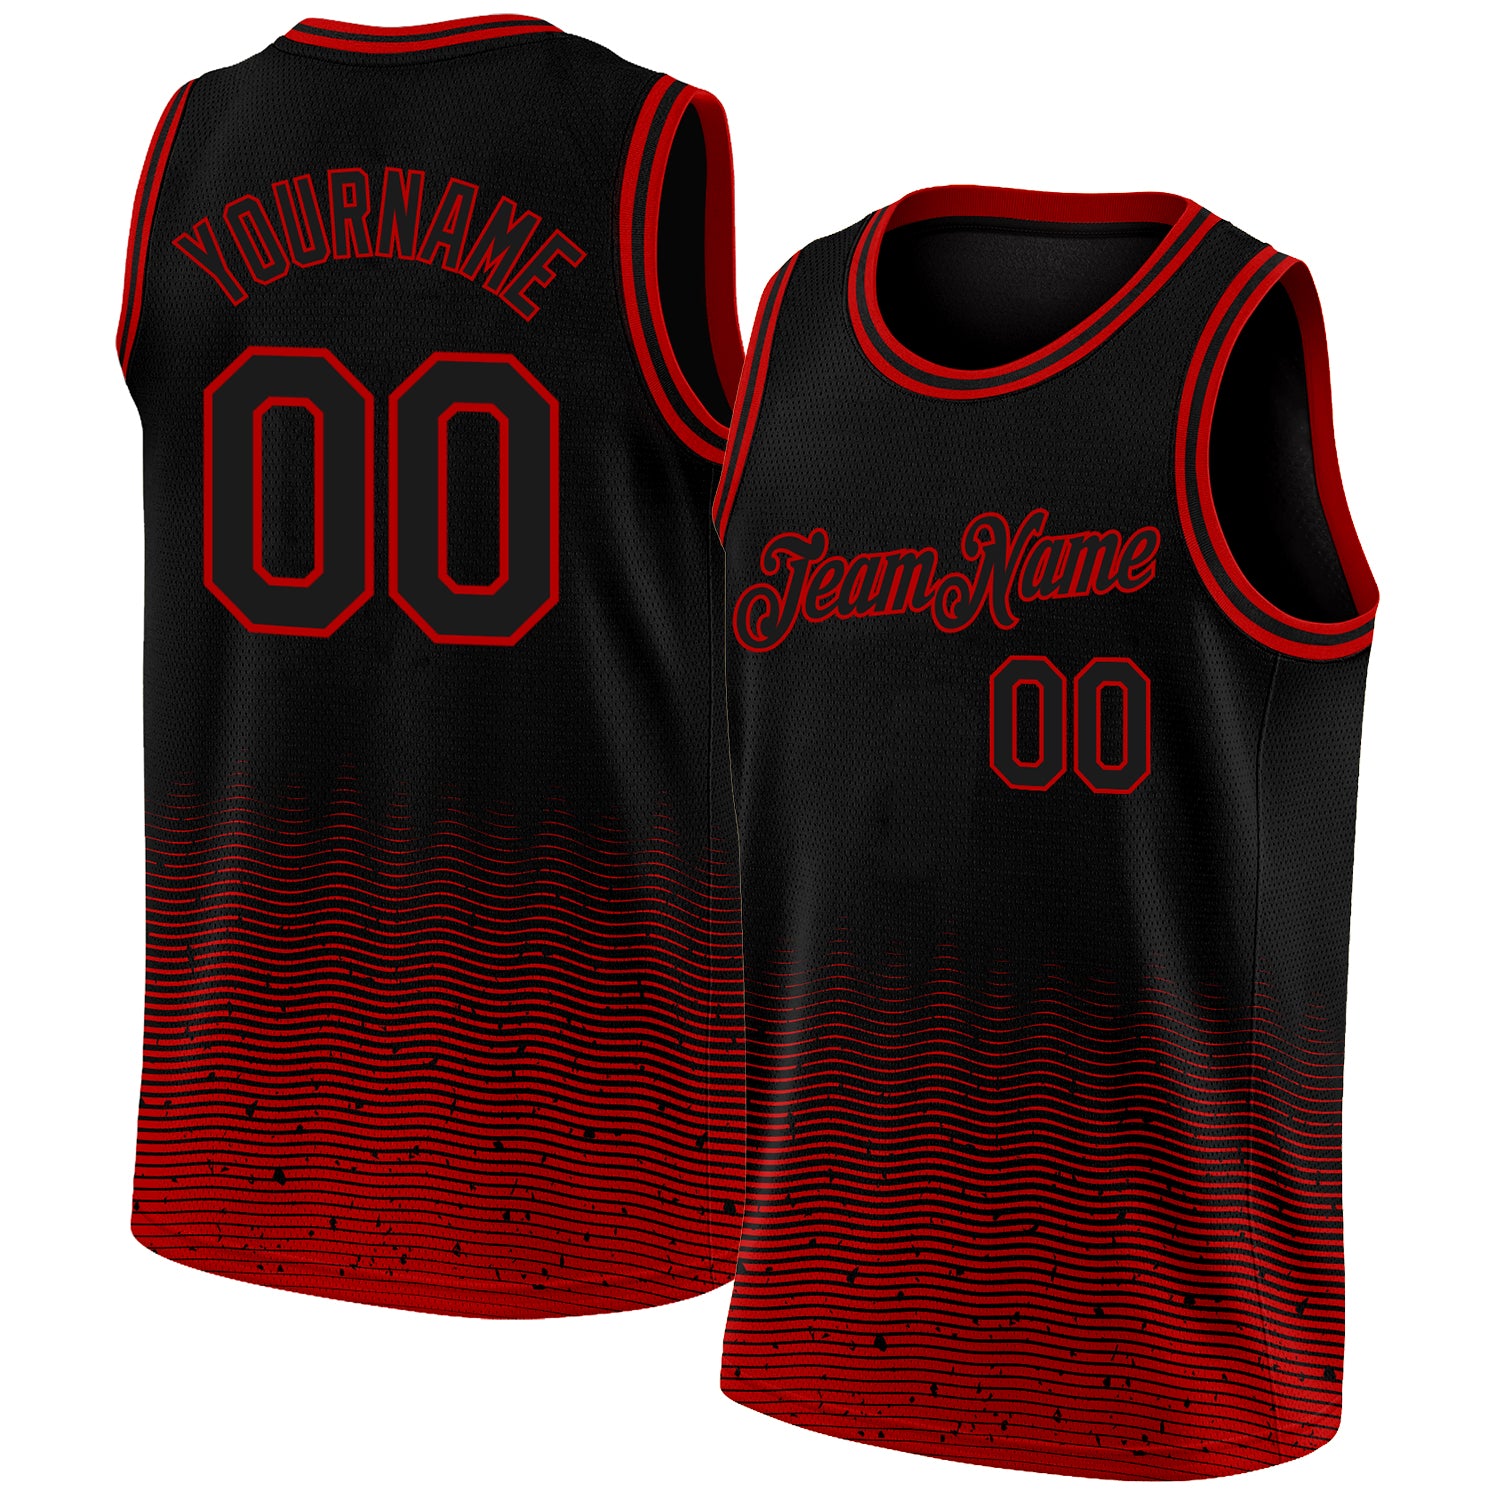 Red Basketball Jersey